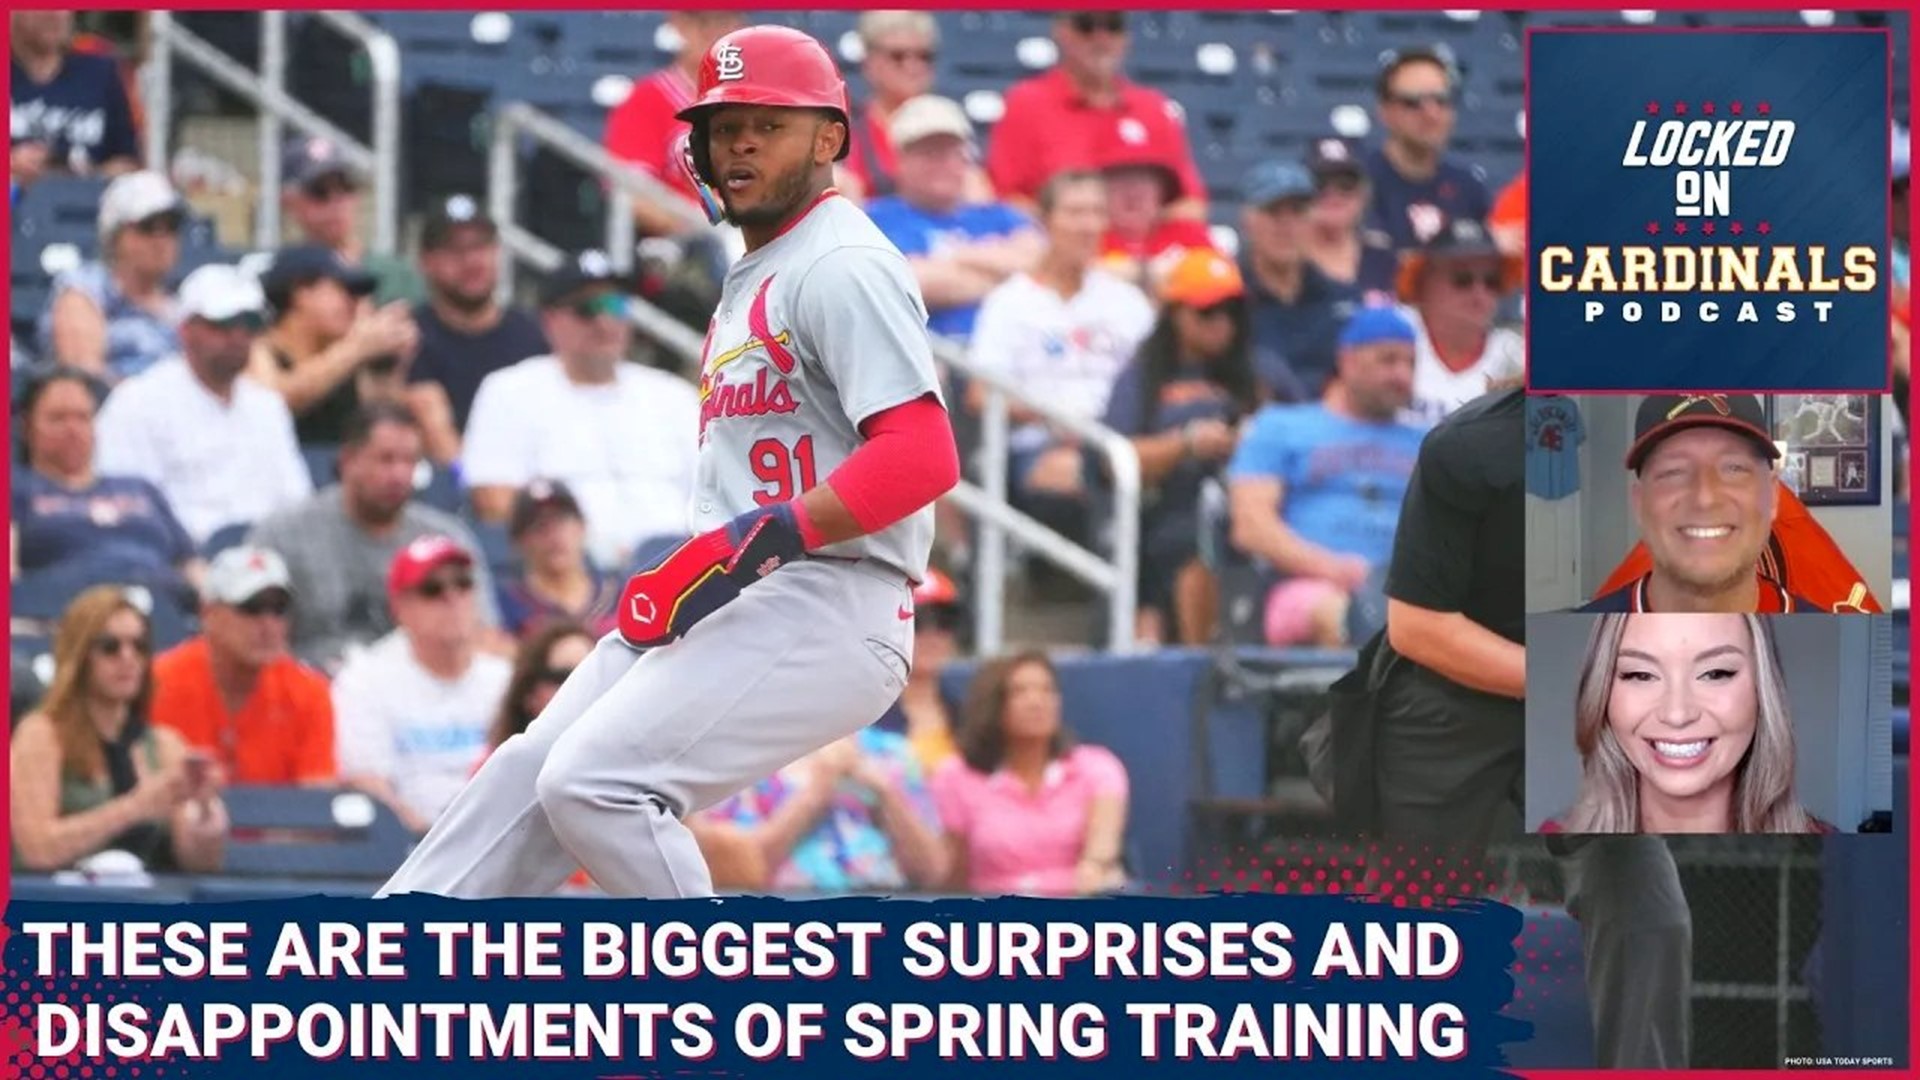 Ohtani Drama, Cardinals Injury Replacements Plus The Biggest Spring Surprises And Disappointments!